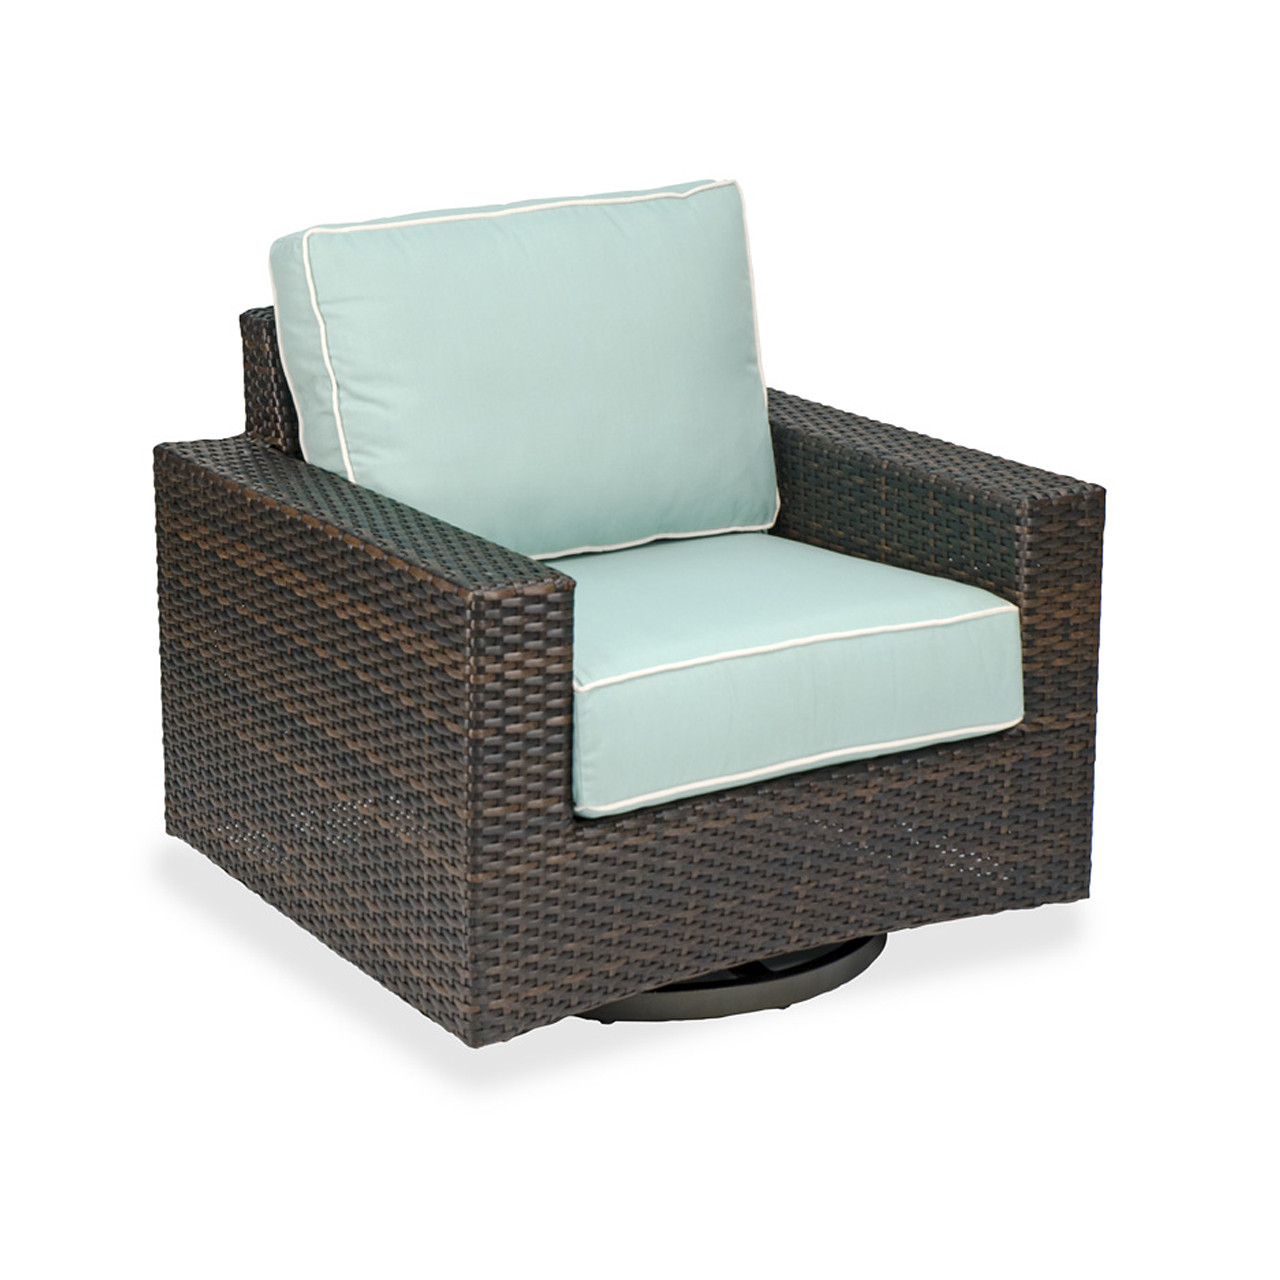 San Lucas Dark Elm Outdoor Wicker and Spectrum Mist Cushion 5 Pc. Swivel Chat Group with 42 in. D Conversation Table